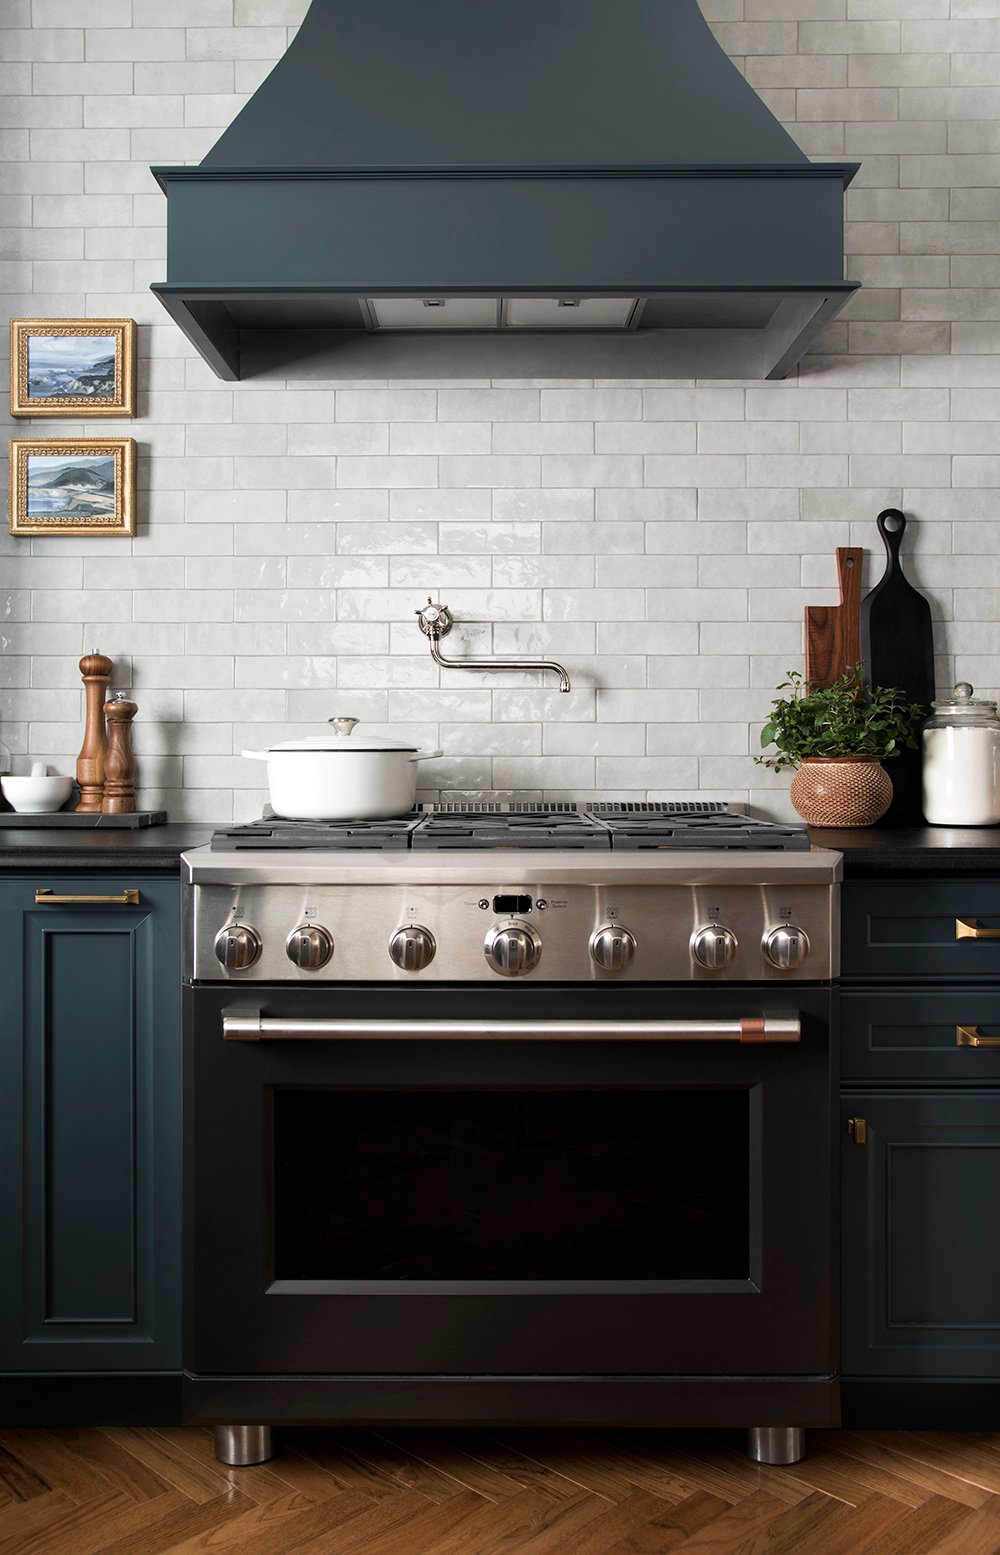 5 Things Every Kitchen Needs That You Might Not Think Of - roomfortuesday.com